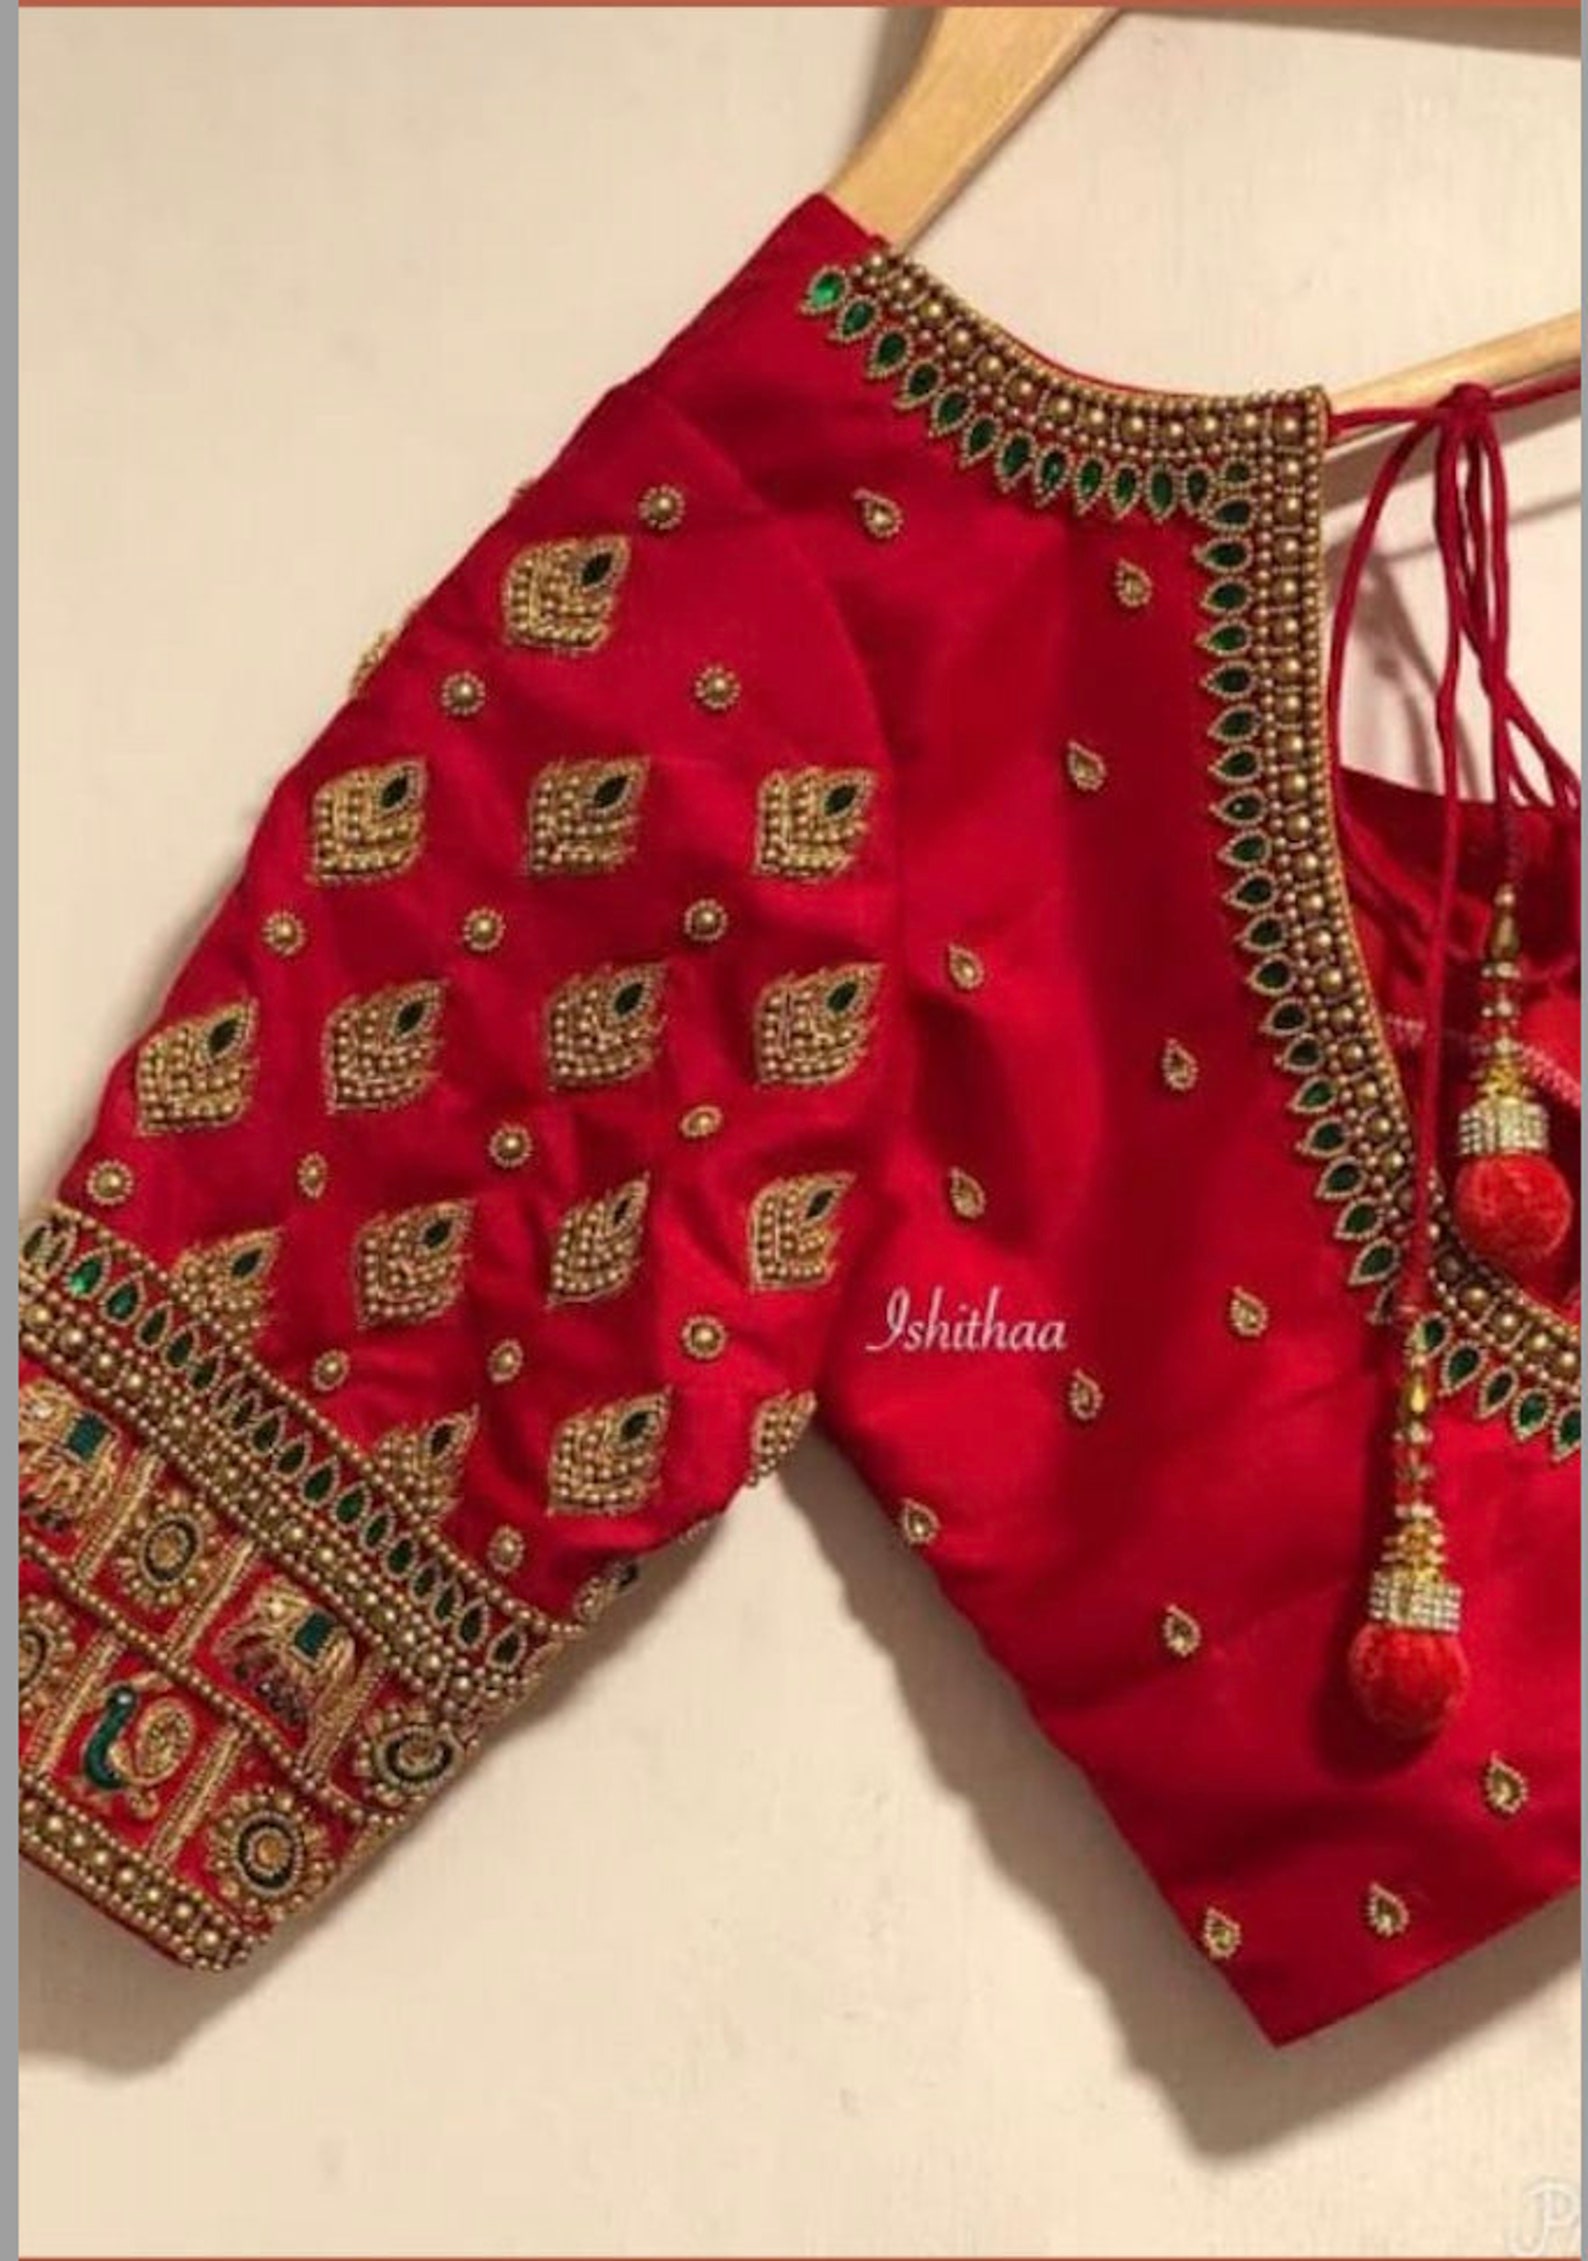 Maggam Work Blouse Tailoring Service by Price Saree Blouse | Etsy